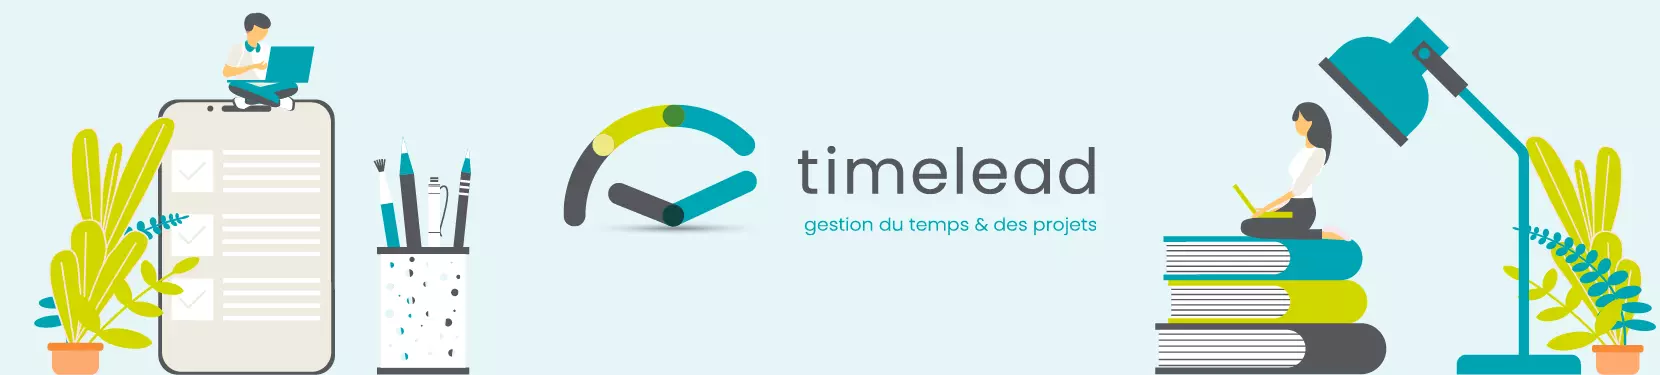 Timelead_banner_site.png